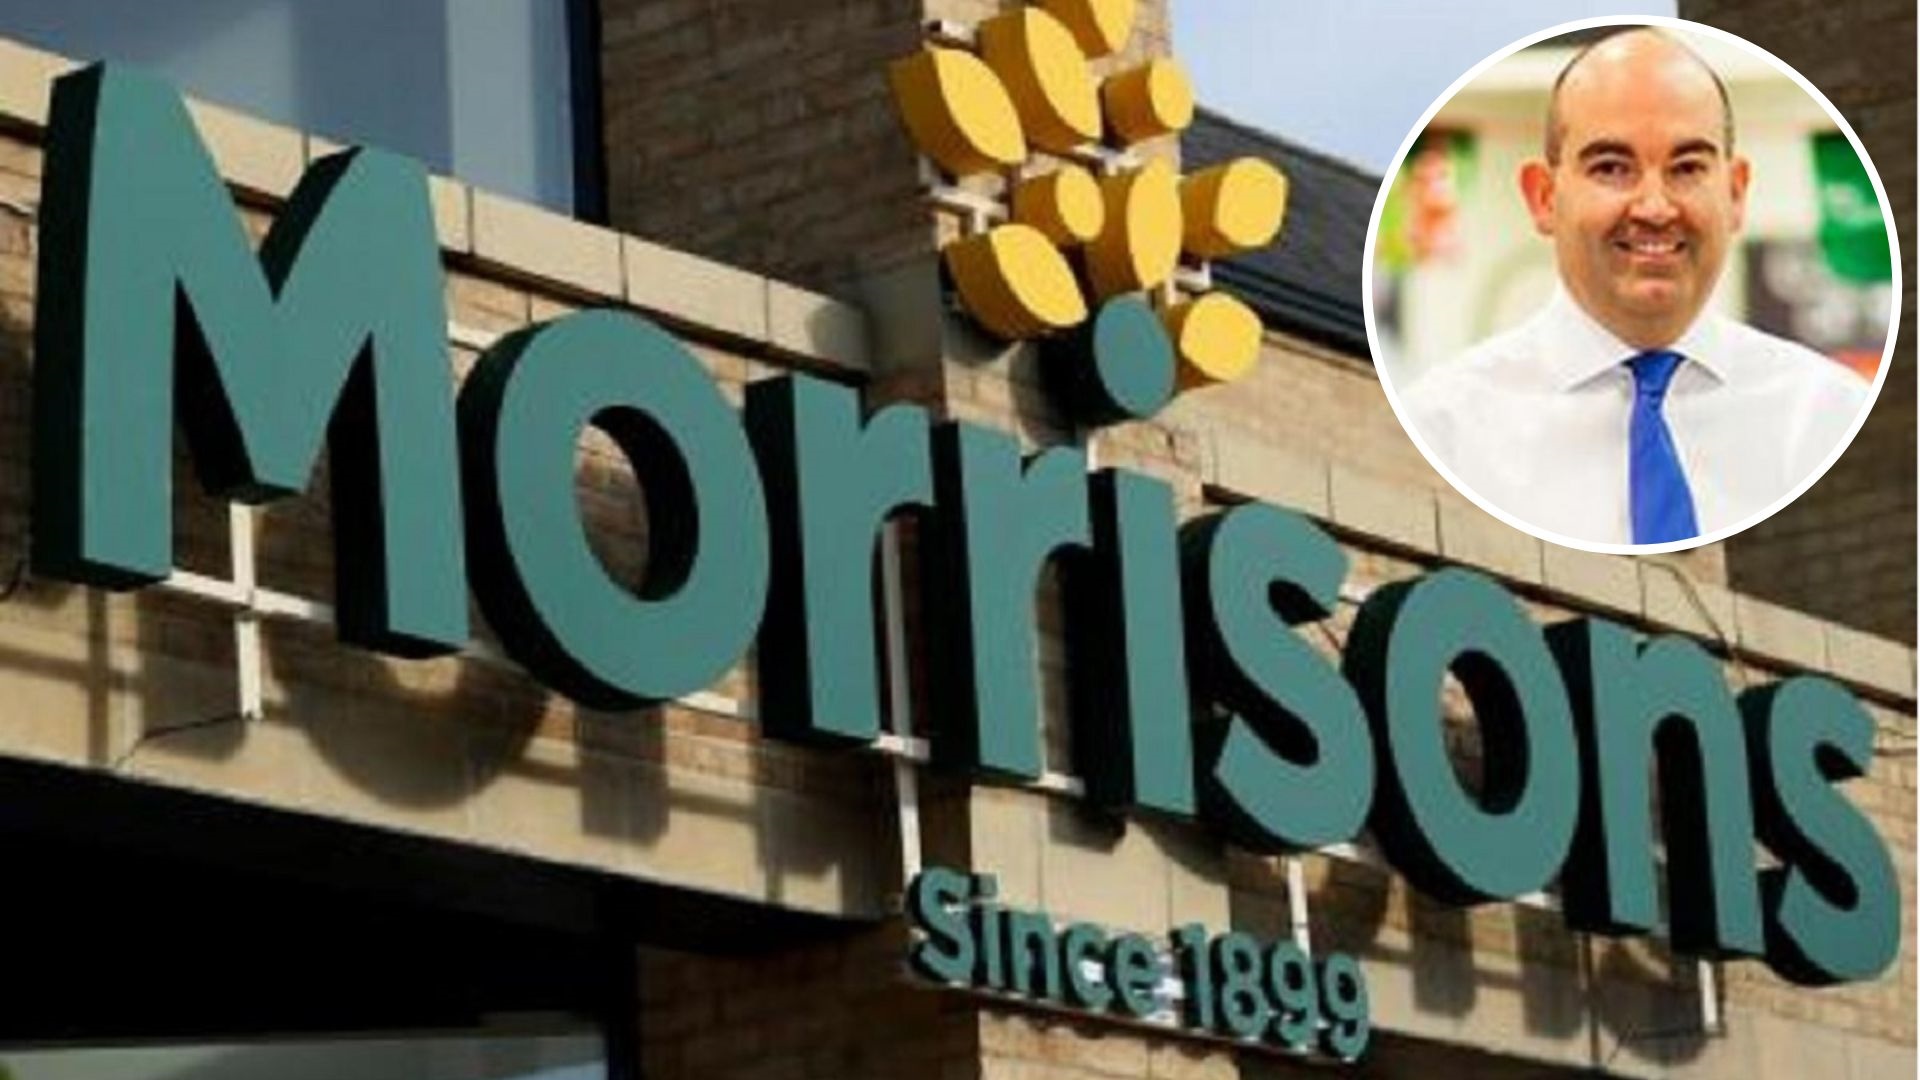 Morrisons' chief operating officer Trevor Strain to step down